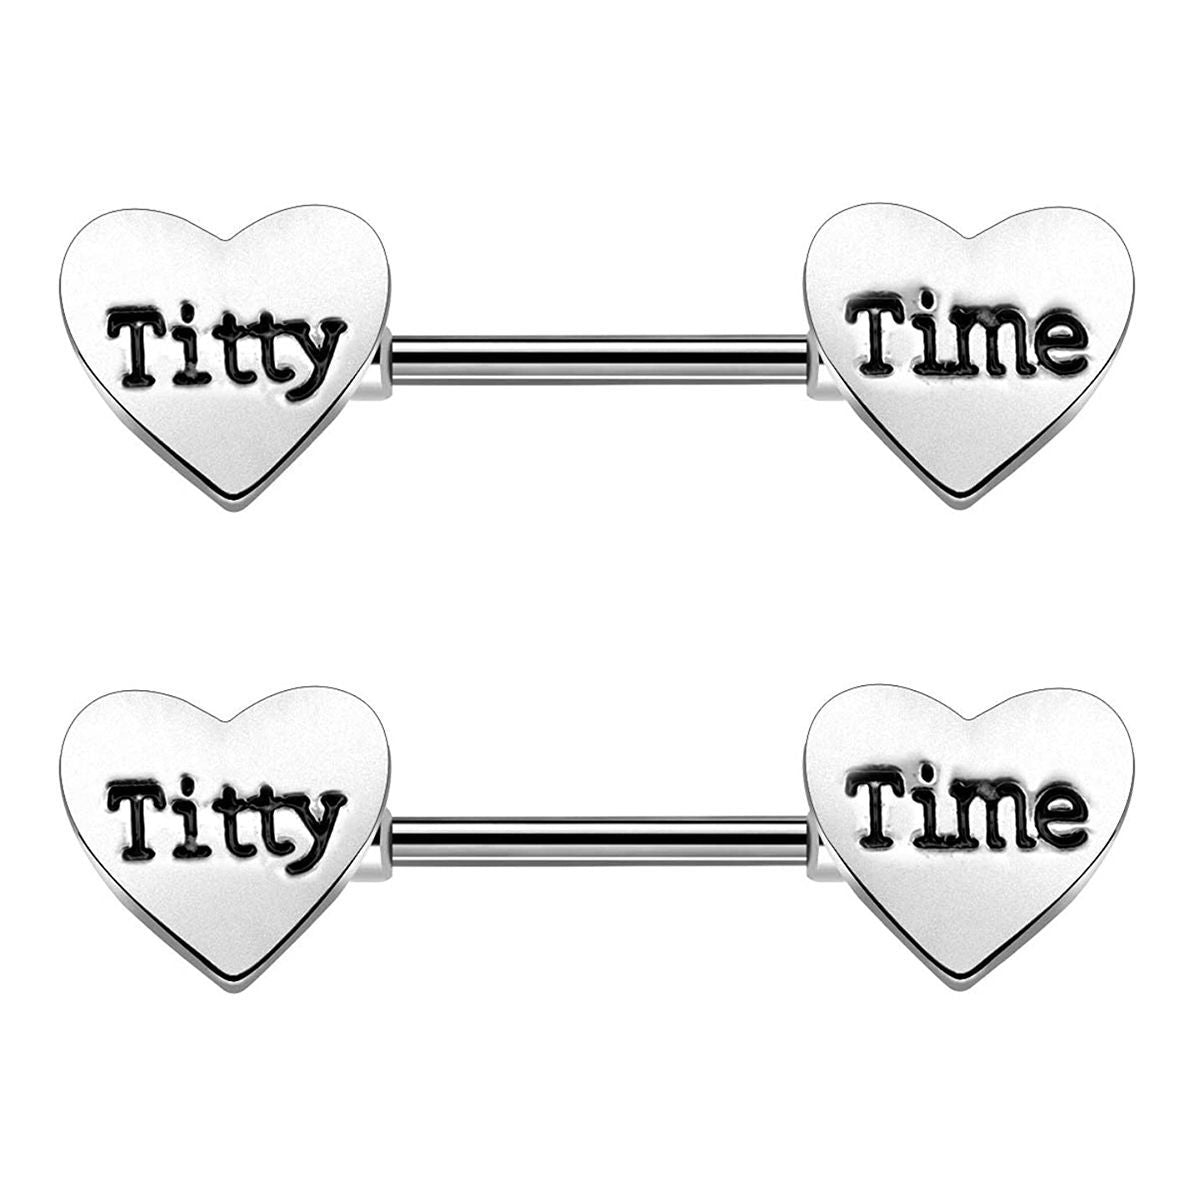 Nipple Rings Piercing for Women Men in Body Piercing Jewelry 14 Gauge Surgical steel Heart with engraving Sold as a pair